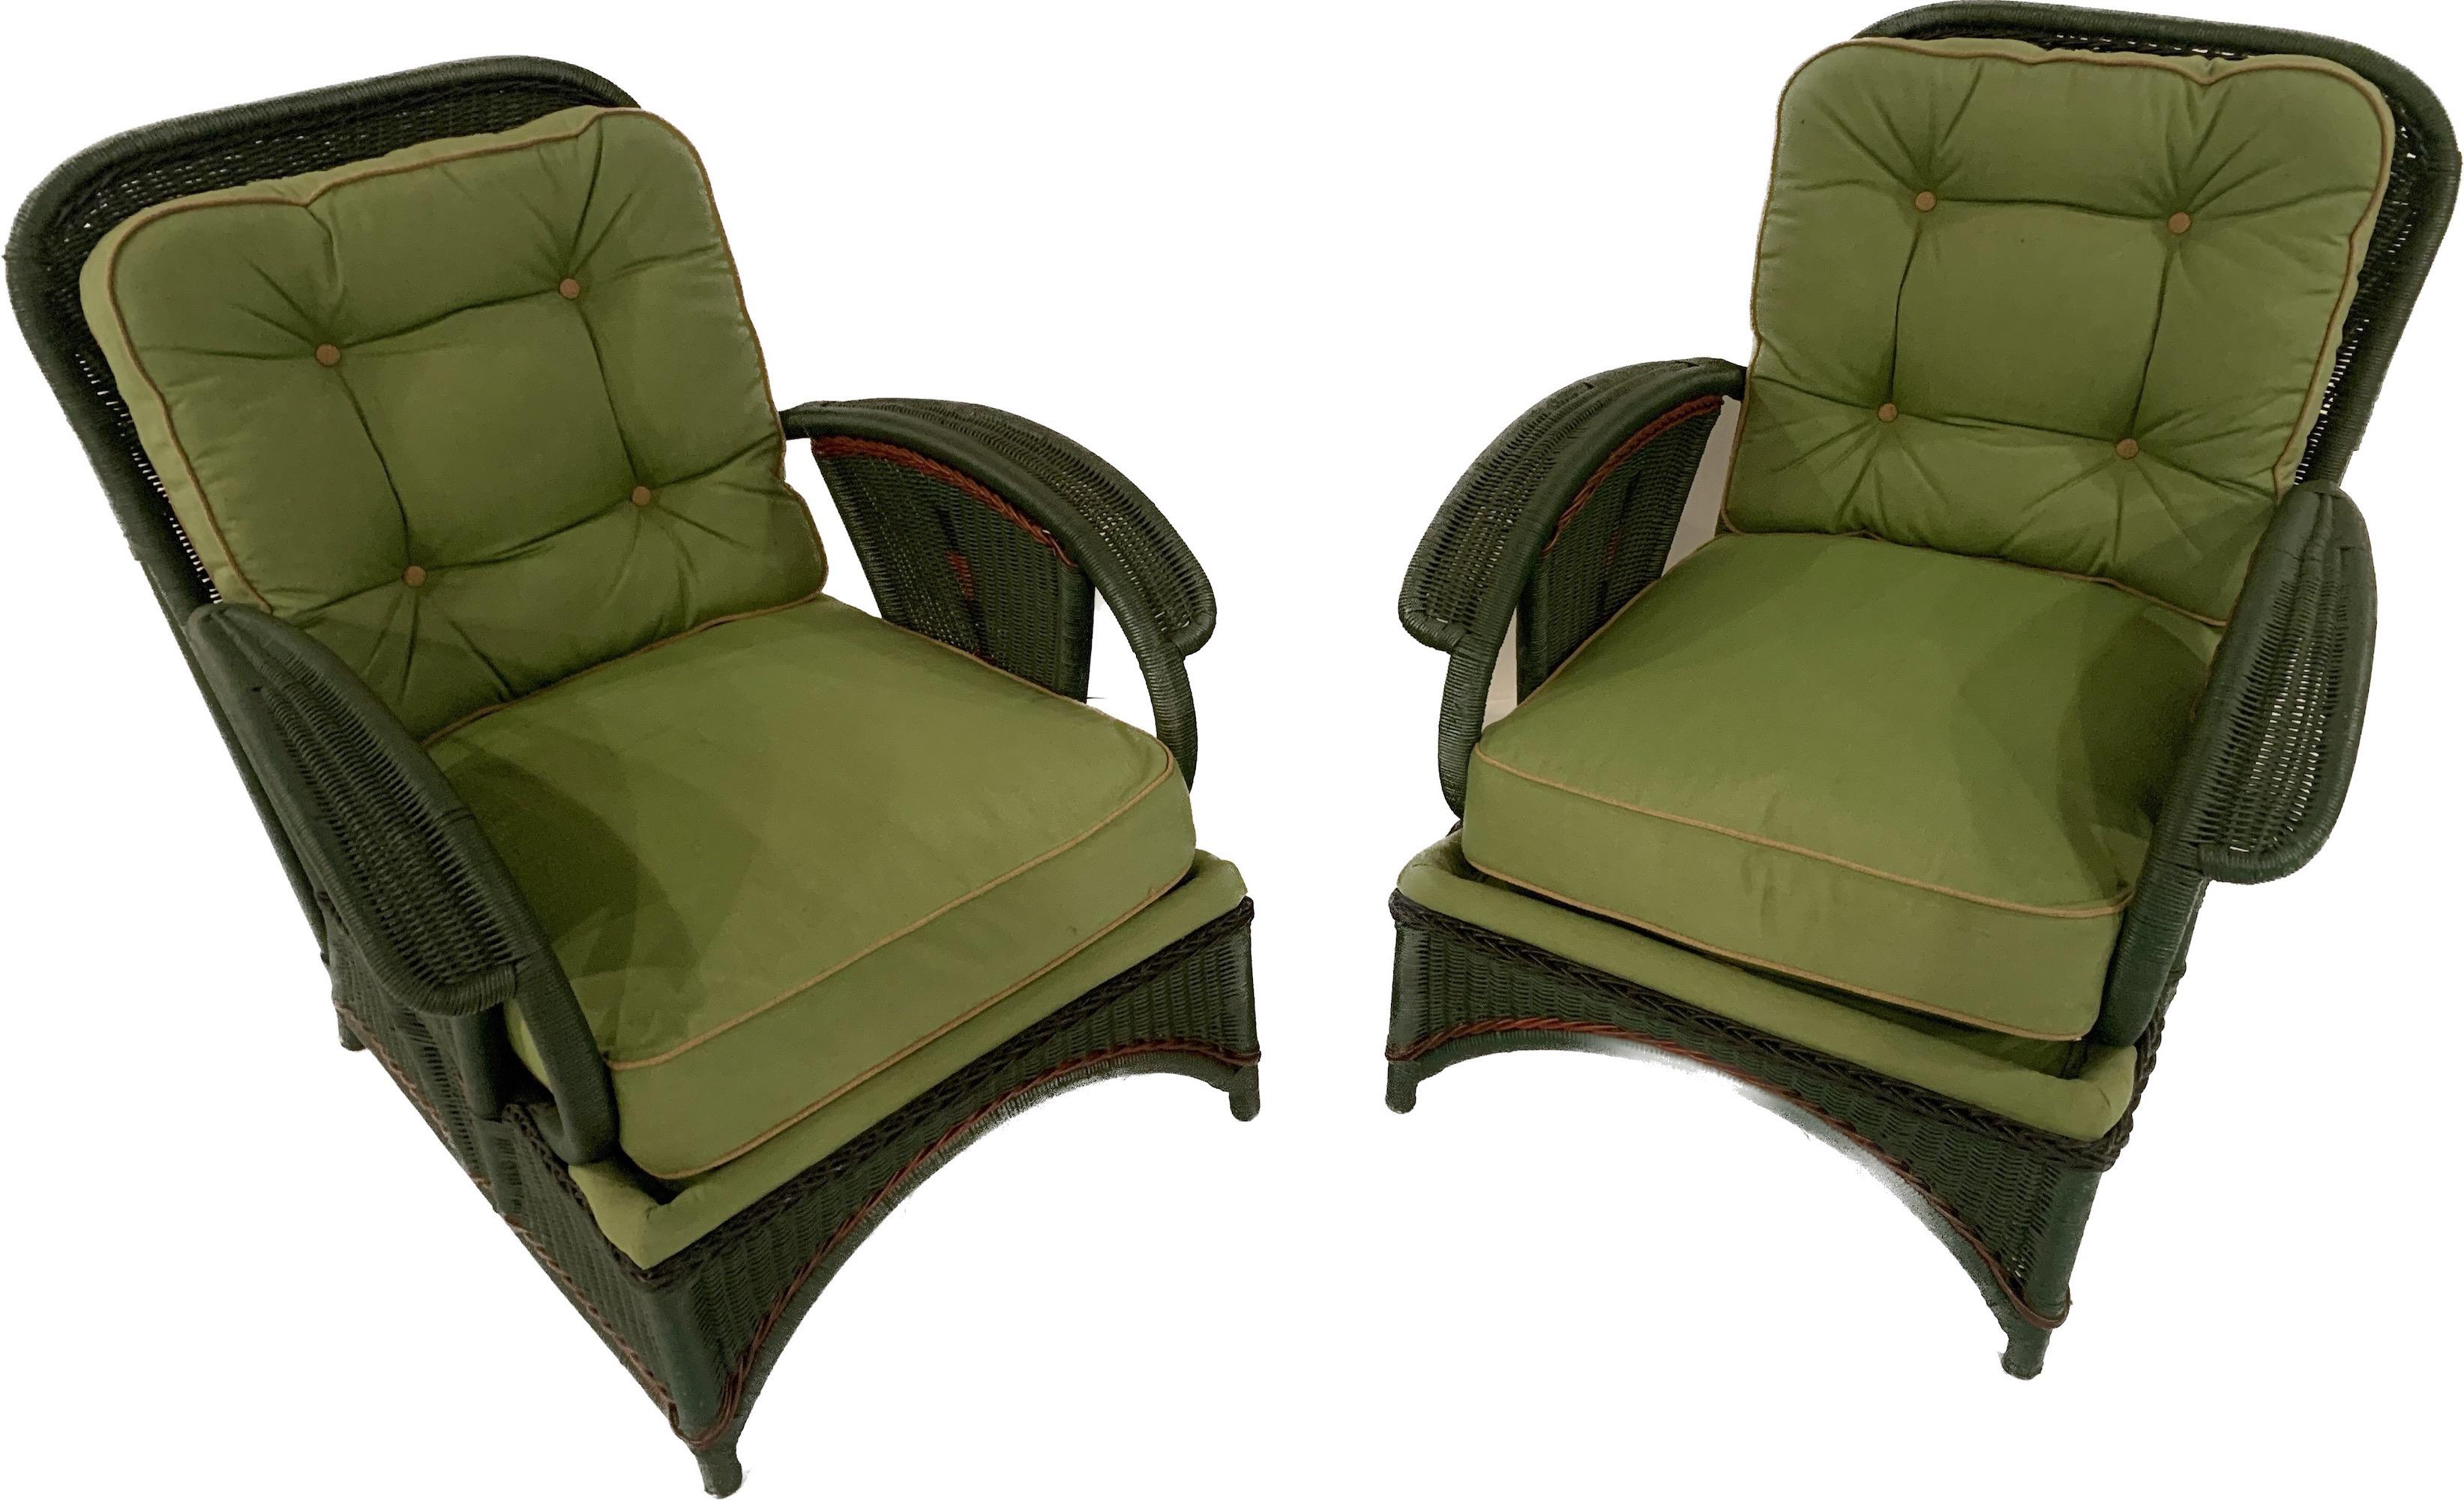 A matched pair of Antique Art Deco Style Wicker Lounge Chairs, American, C. 1920s. These chairs were the height of fashion in the 1920s. Painted reed furniture was all the rage for a short period with their dramatic design shapes and colorful